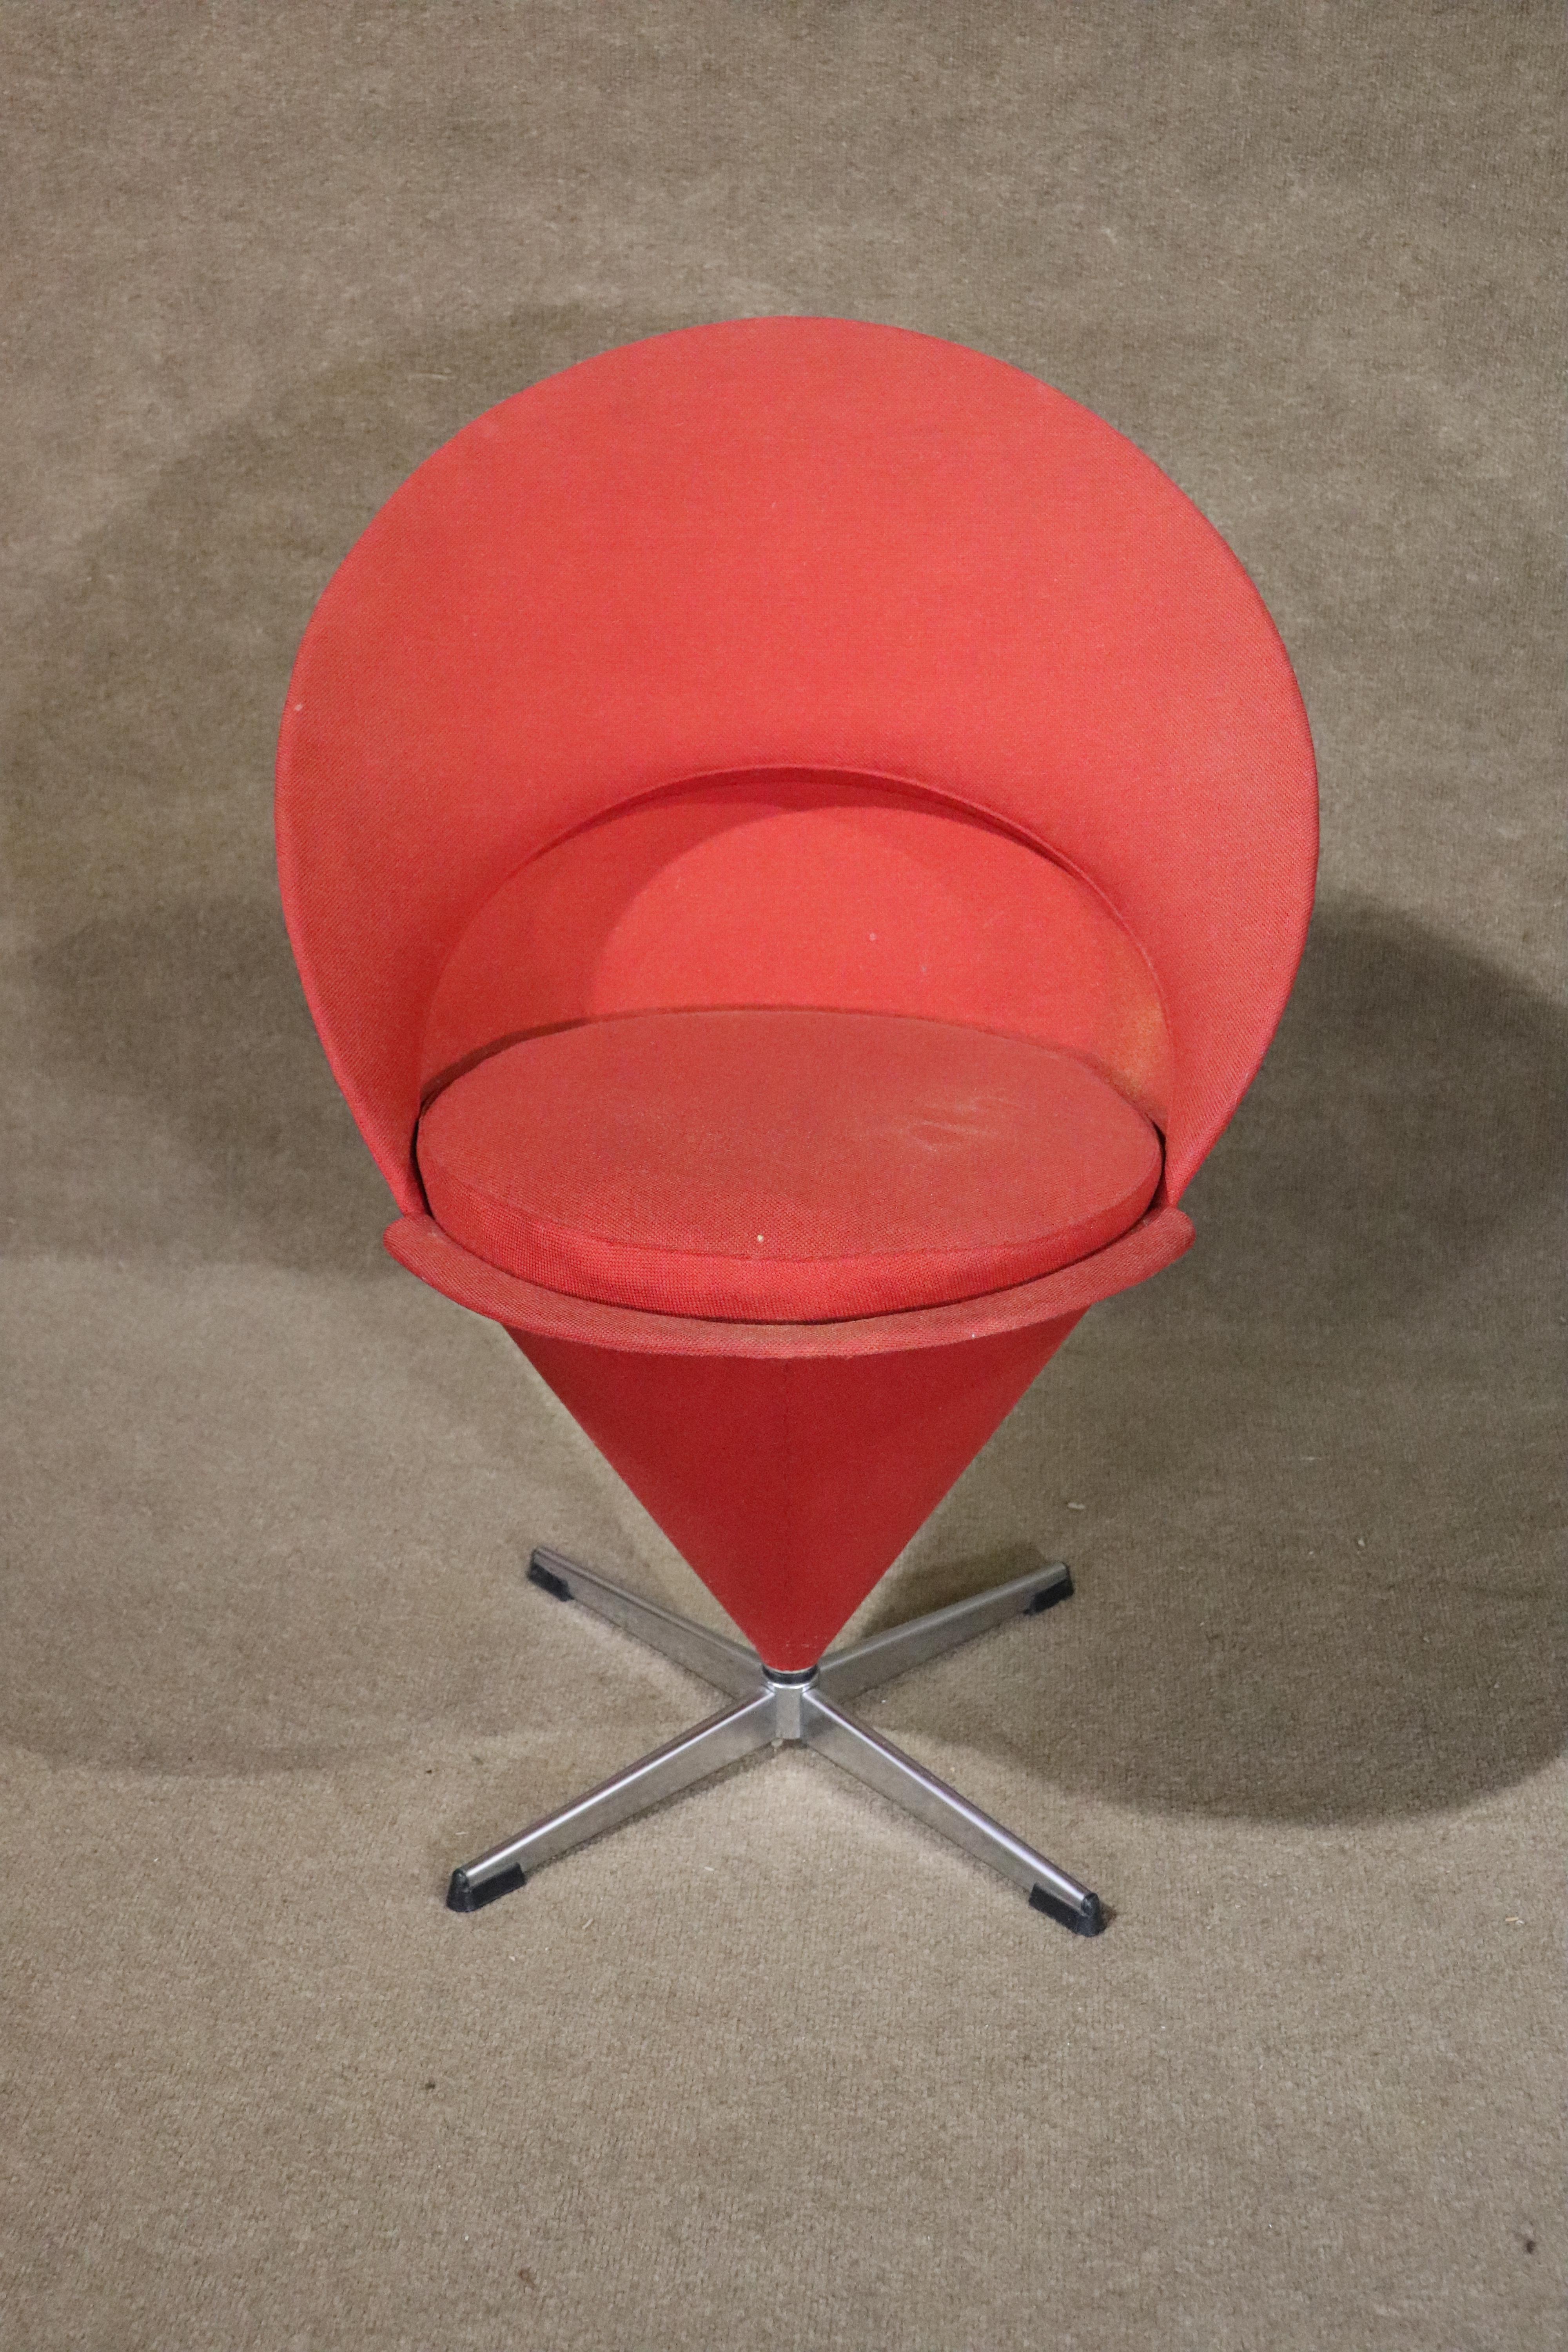 This mid-century modern chair is a classic! Designed by Verner Panton in 1958 it pushed the envelope for modern seating design.
Please confirm location NY or NJ